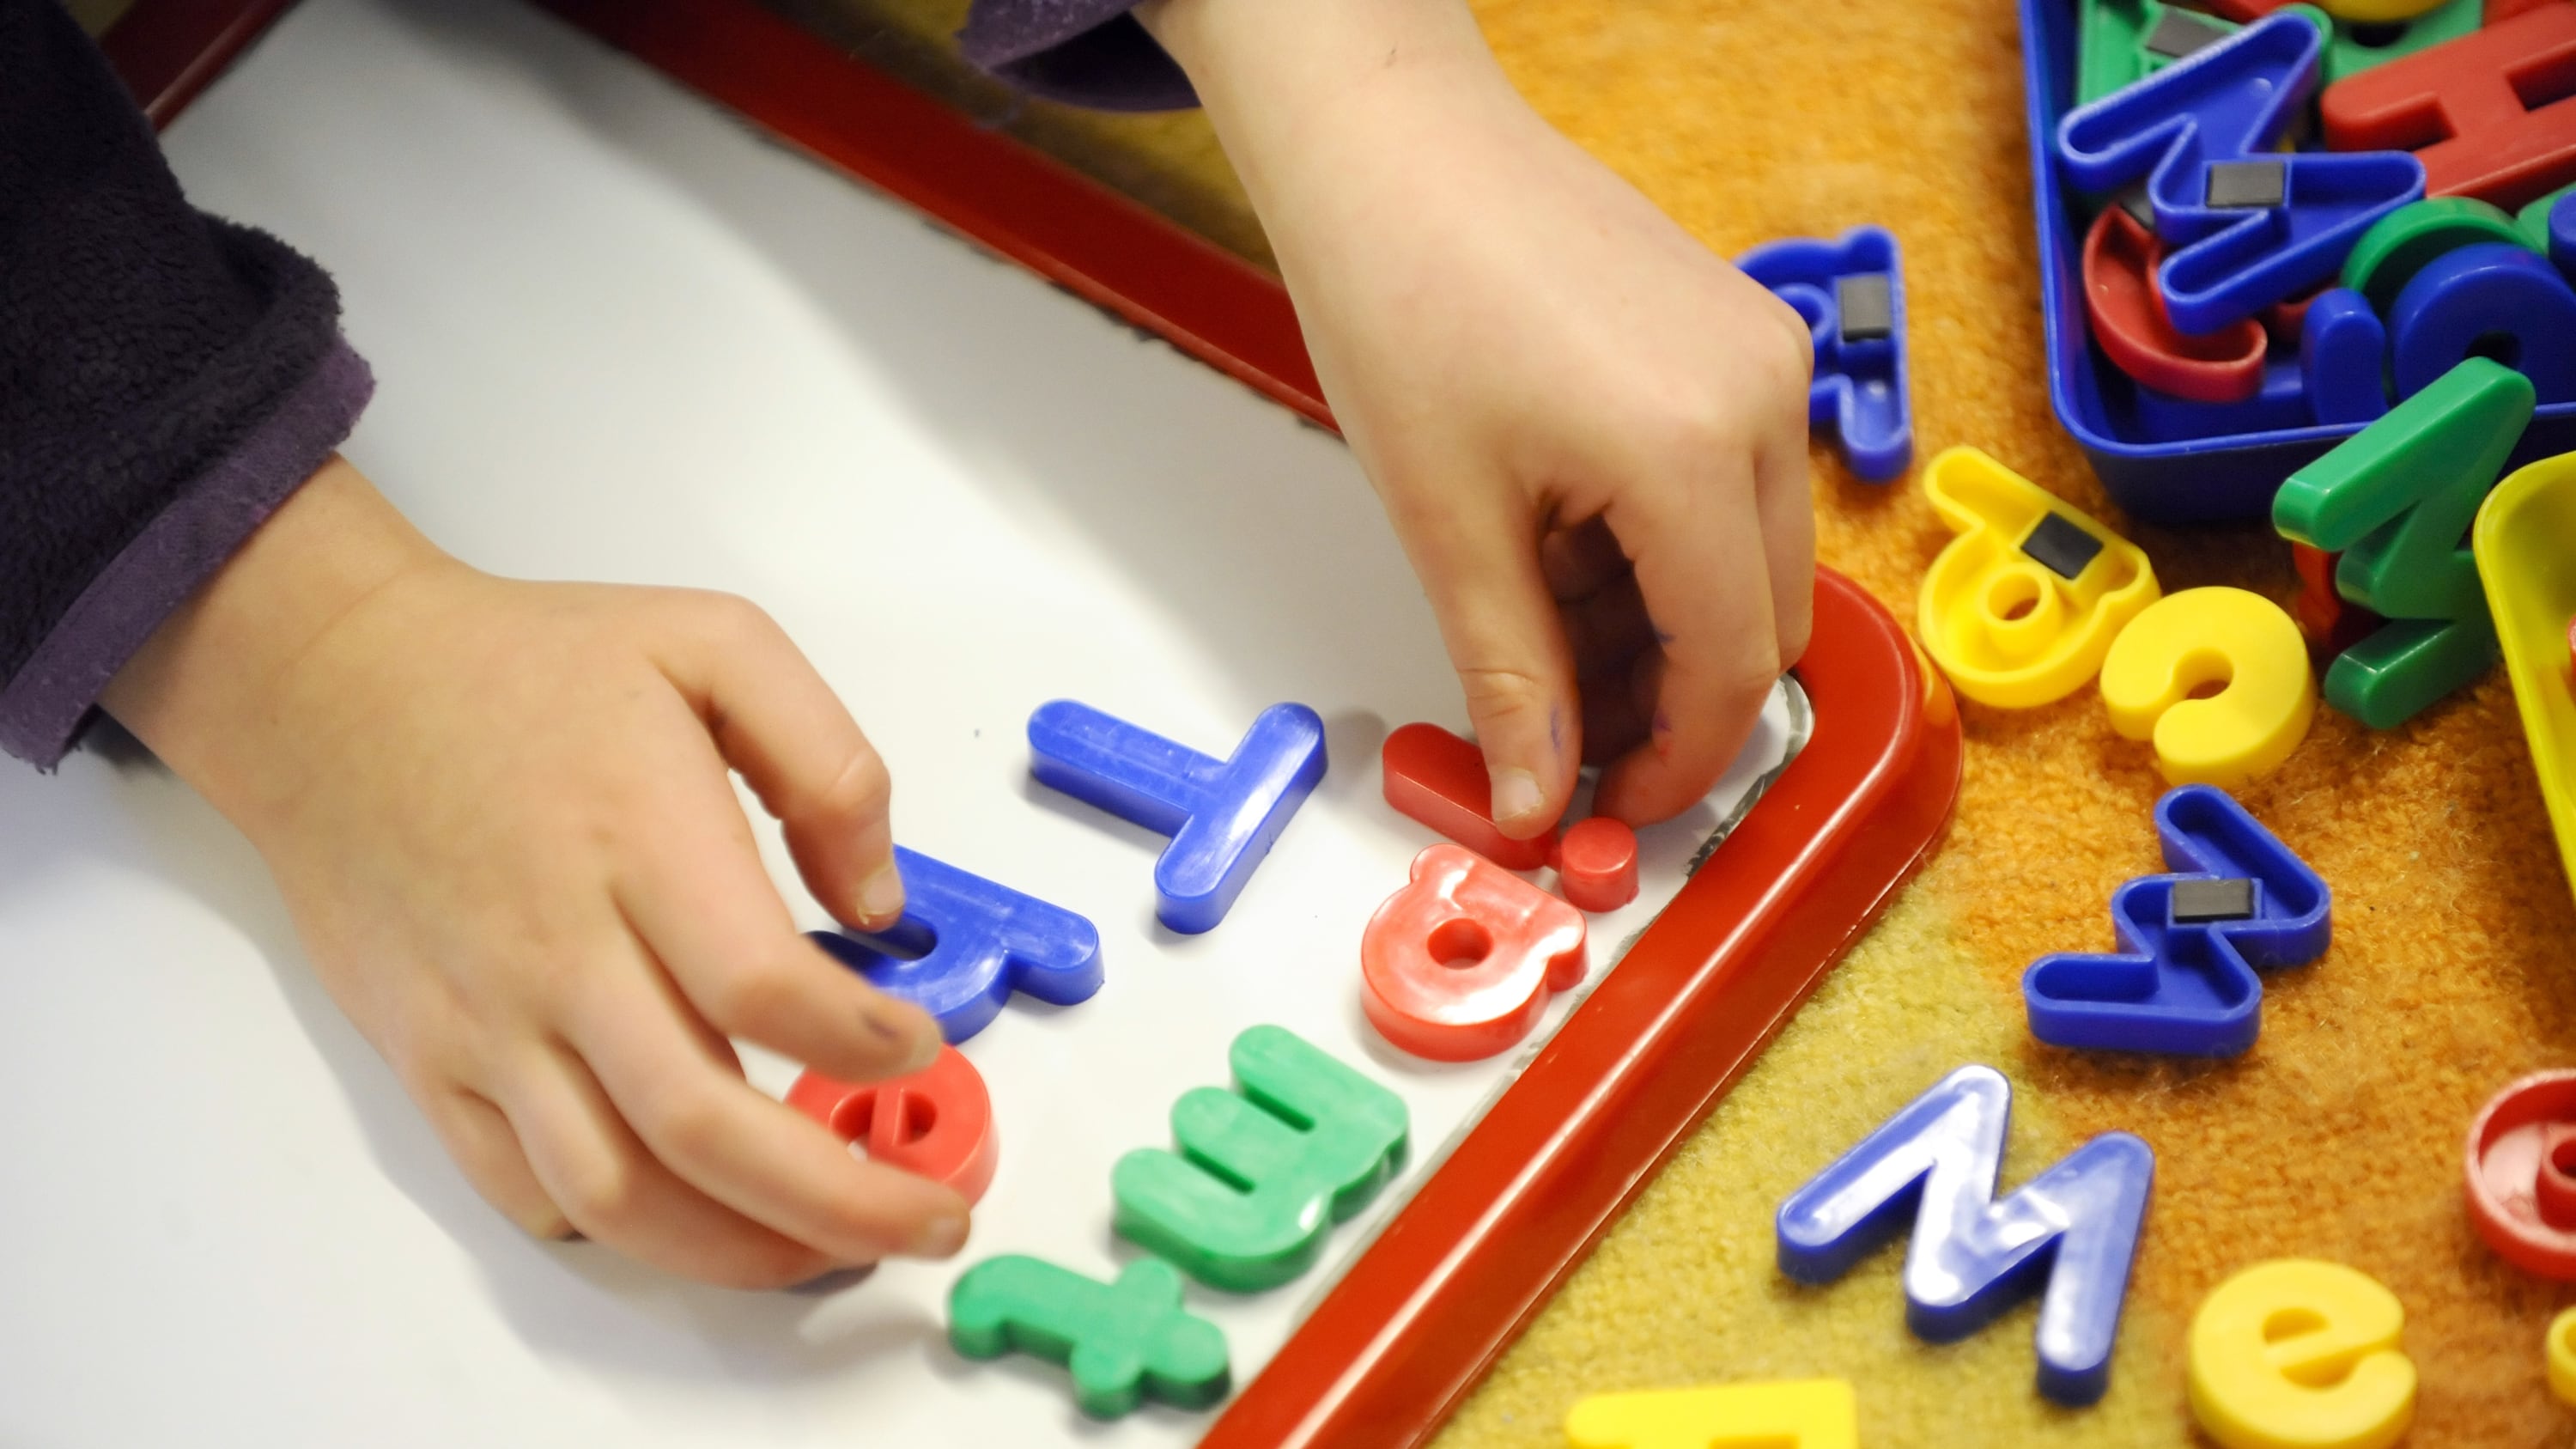 More than half of English local authorities surveyed said they were not confident of being able to deliver the next phase of the childcare expansion from September